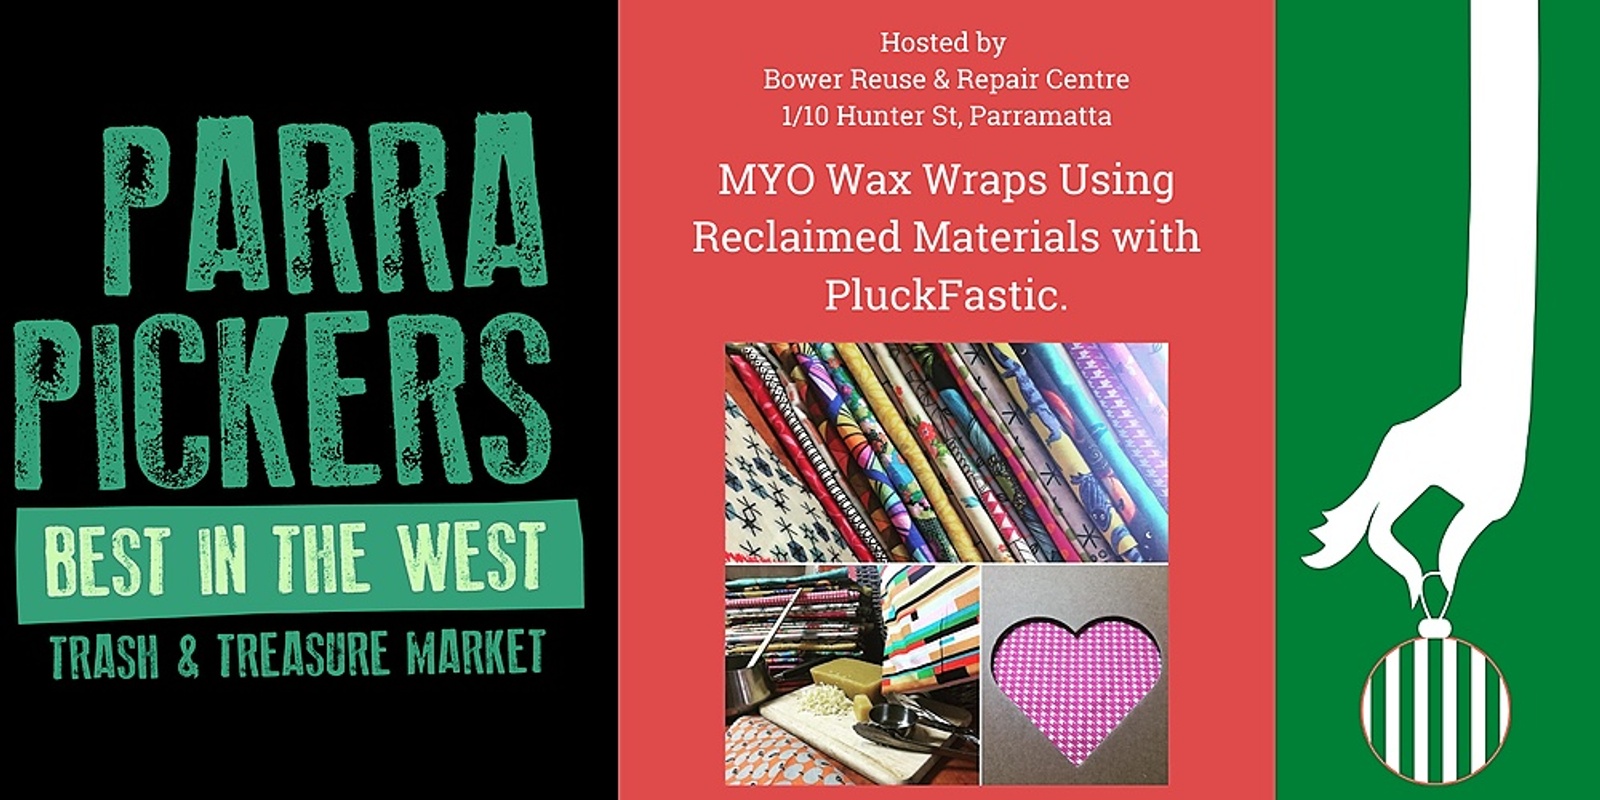 Parra Pickers - Make Your Own Workshop - Wax Wraps with PluckFastic